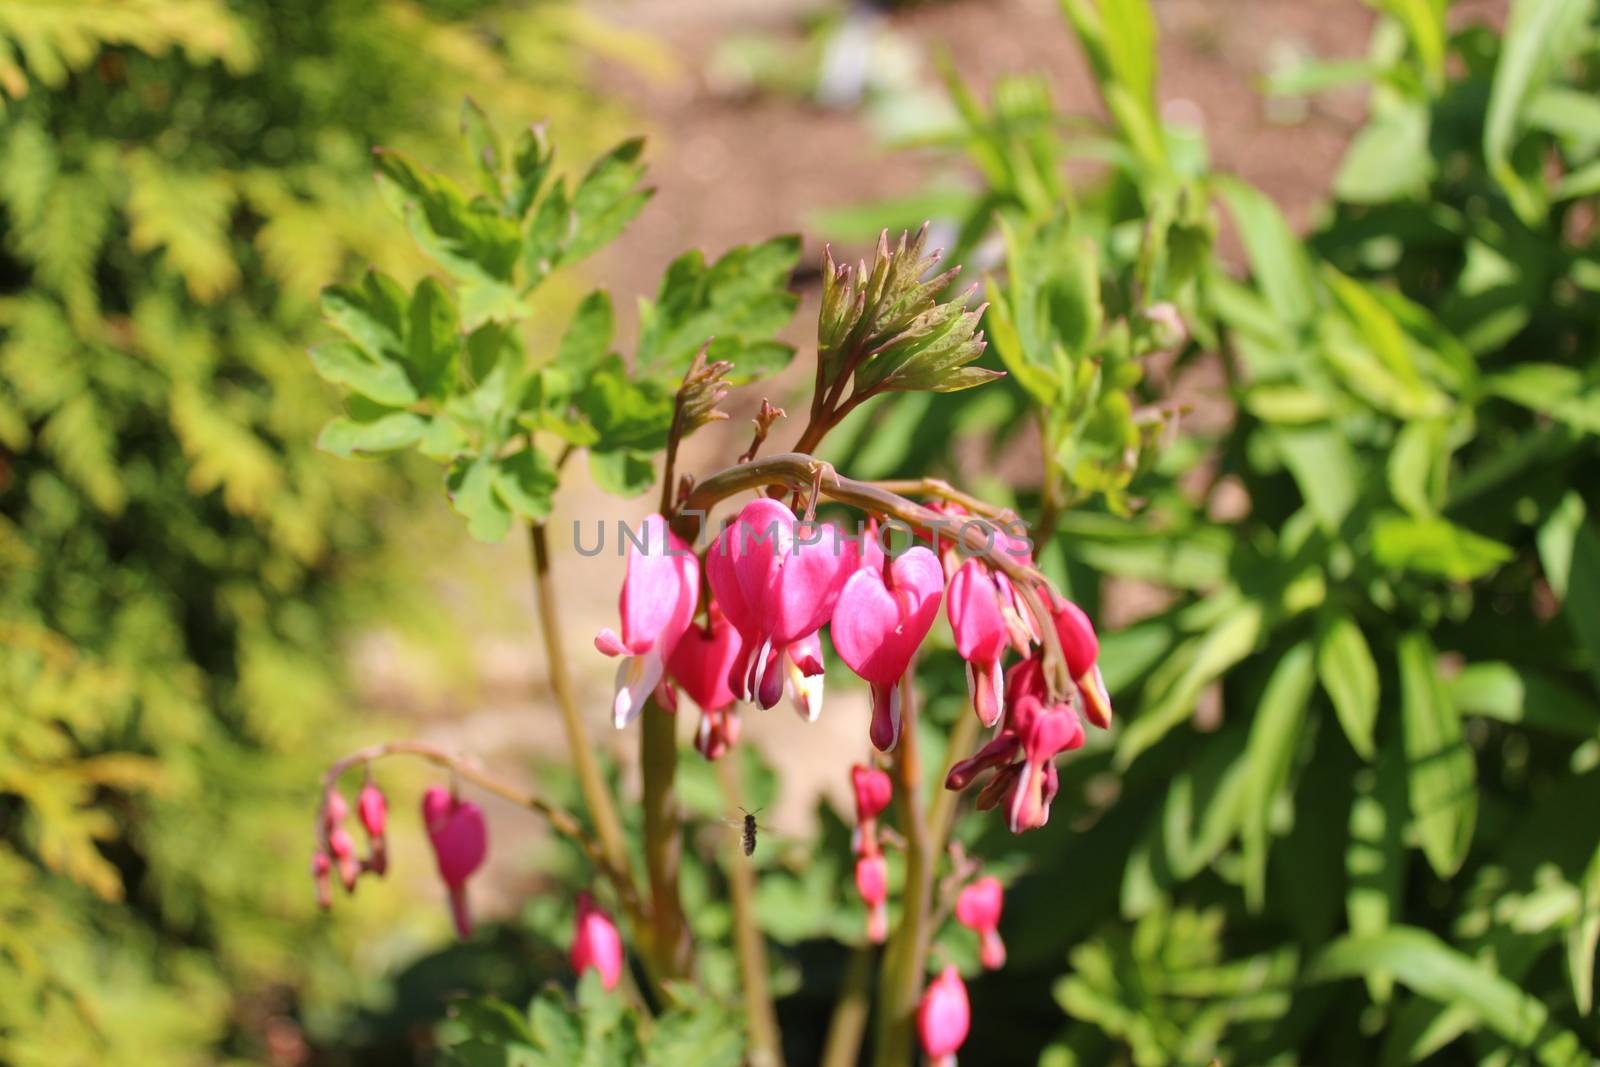 The picture shows a bleeding heart in the garden.